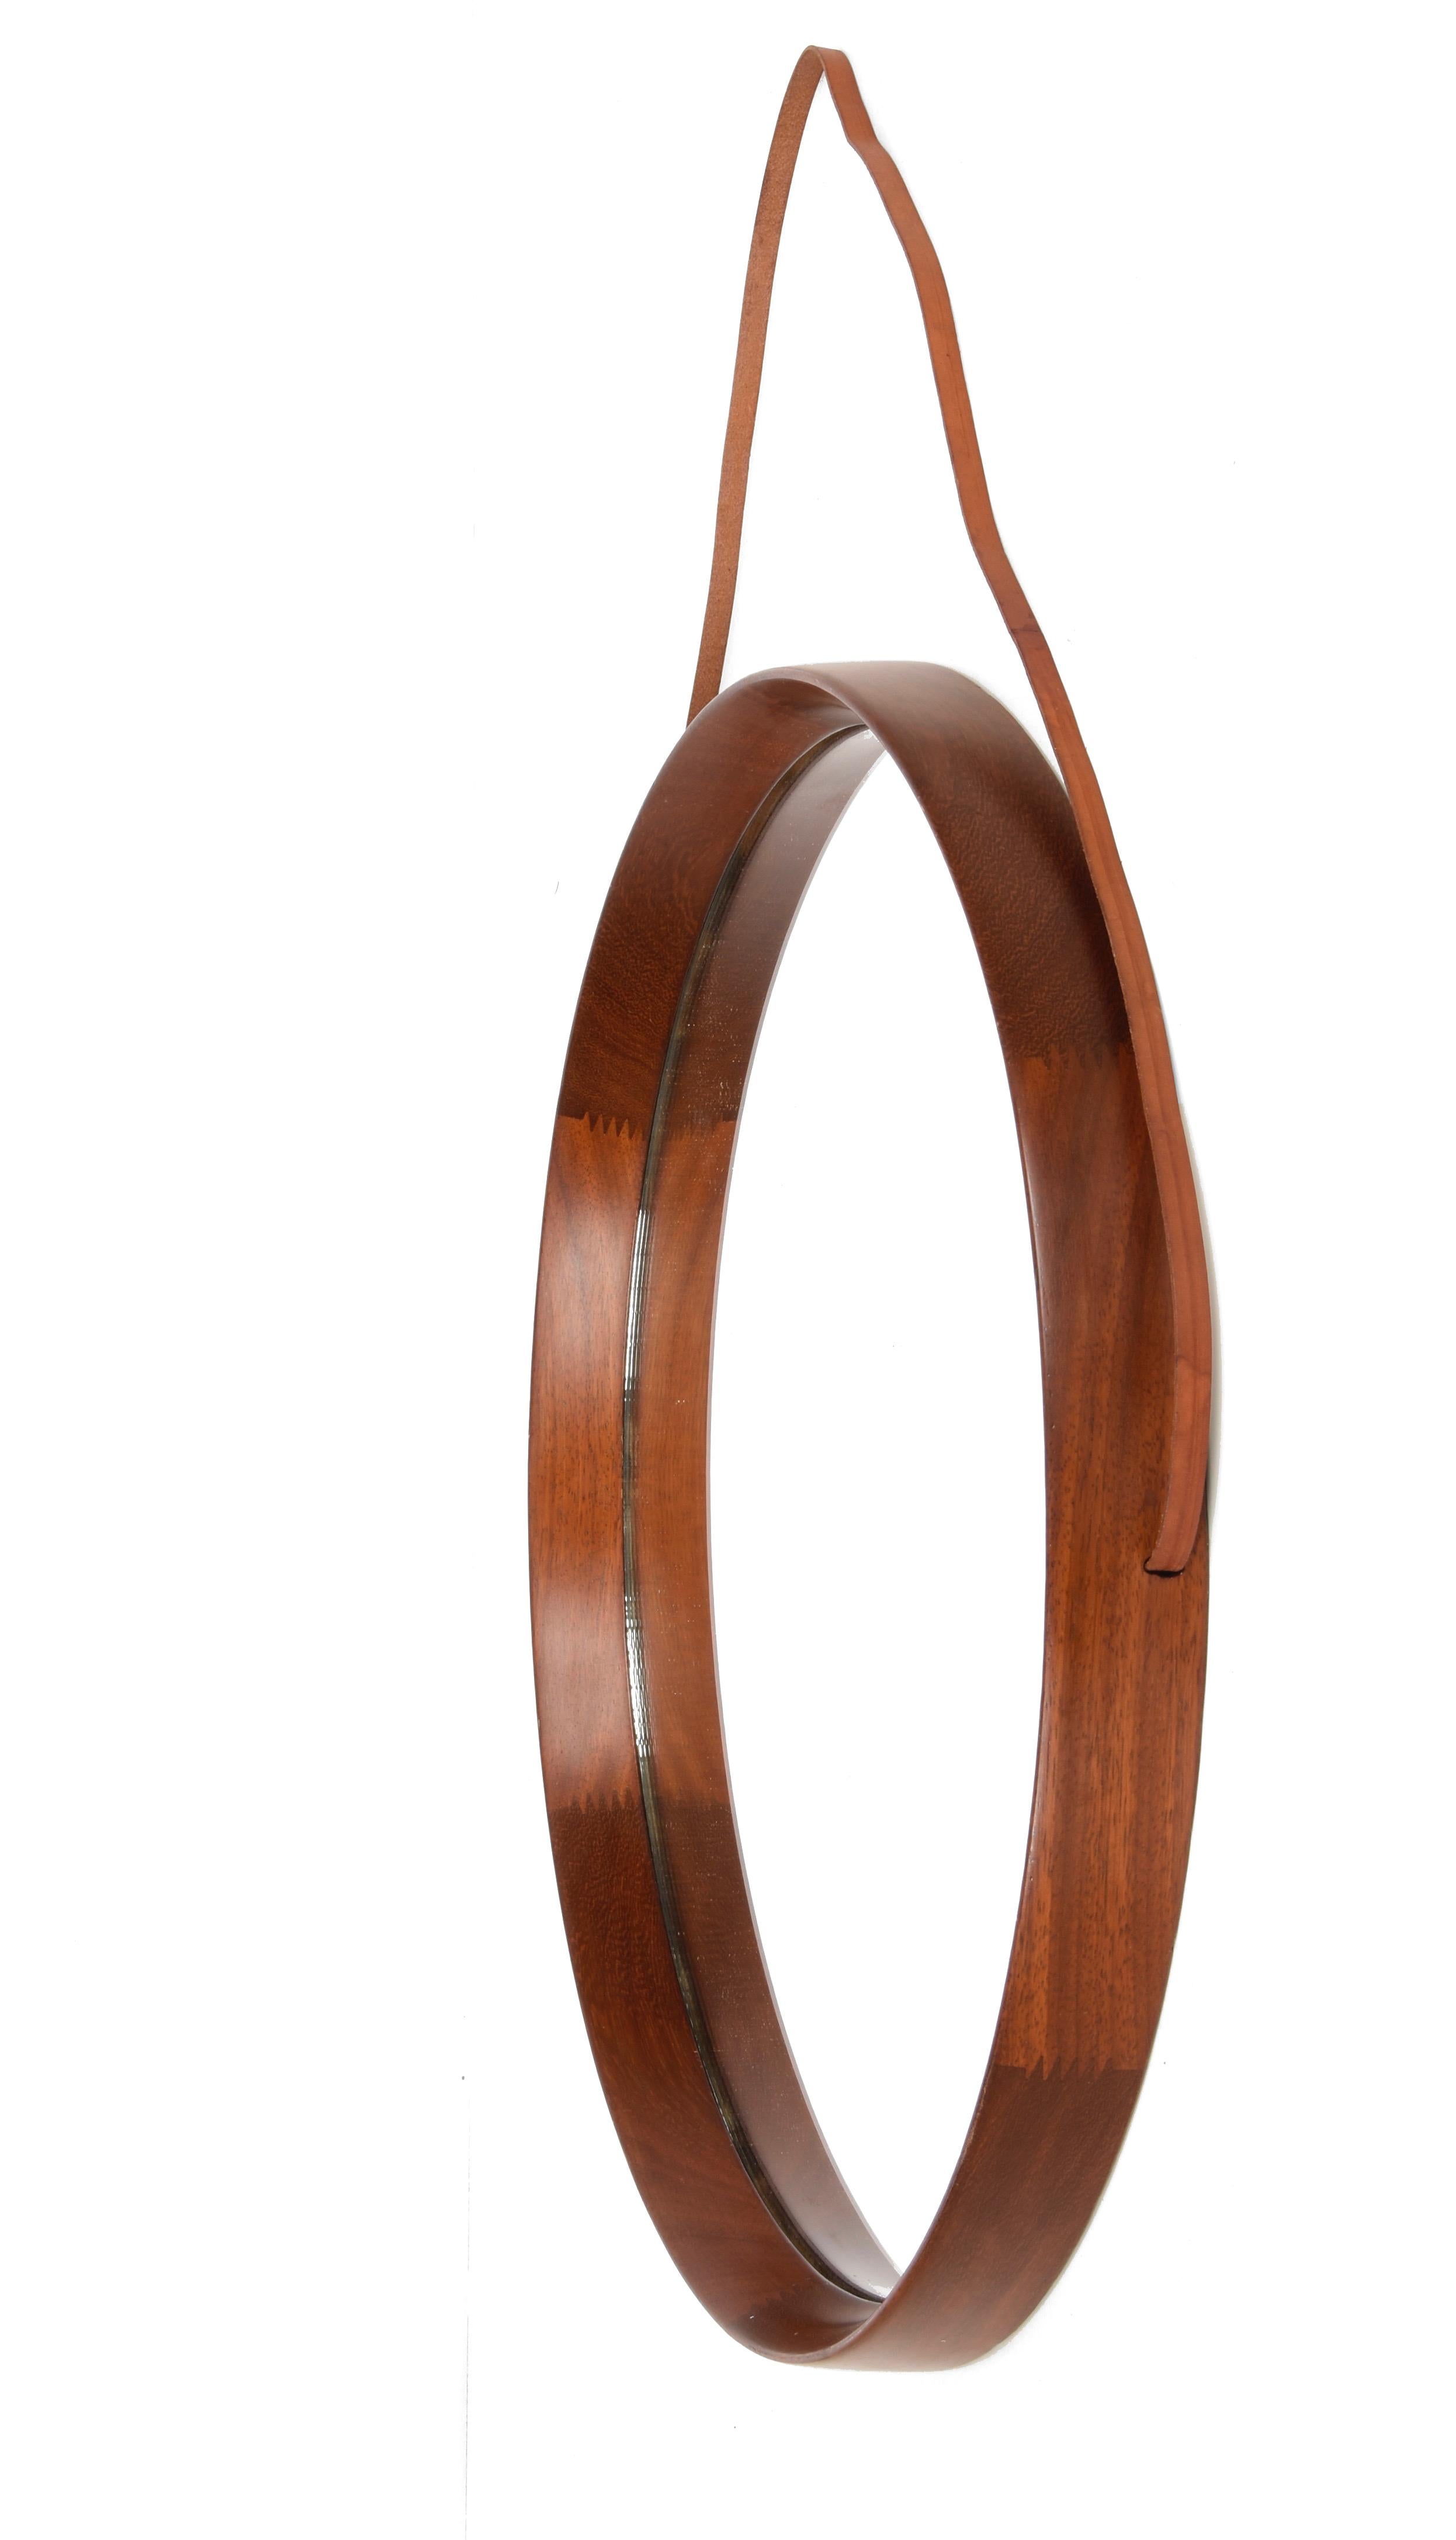 20th Century Uno & Östen Kristiansson Wood and Leather Swedish Wall Mirror for Luxus, 1960s For Sale